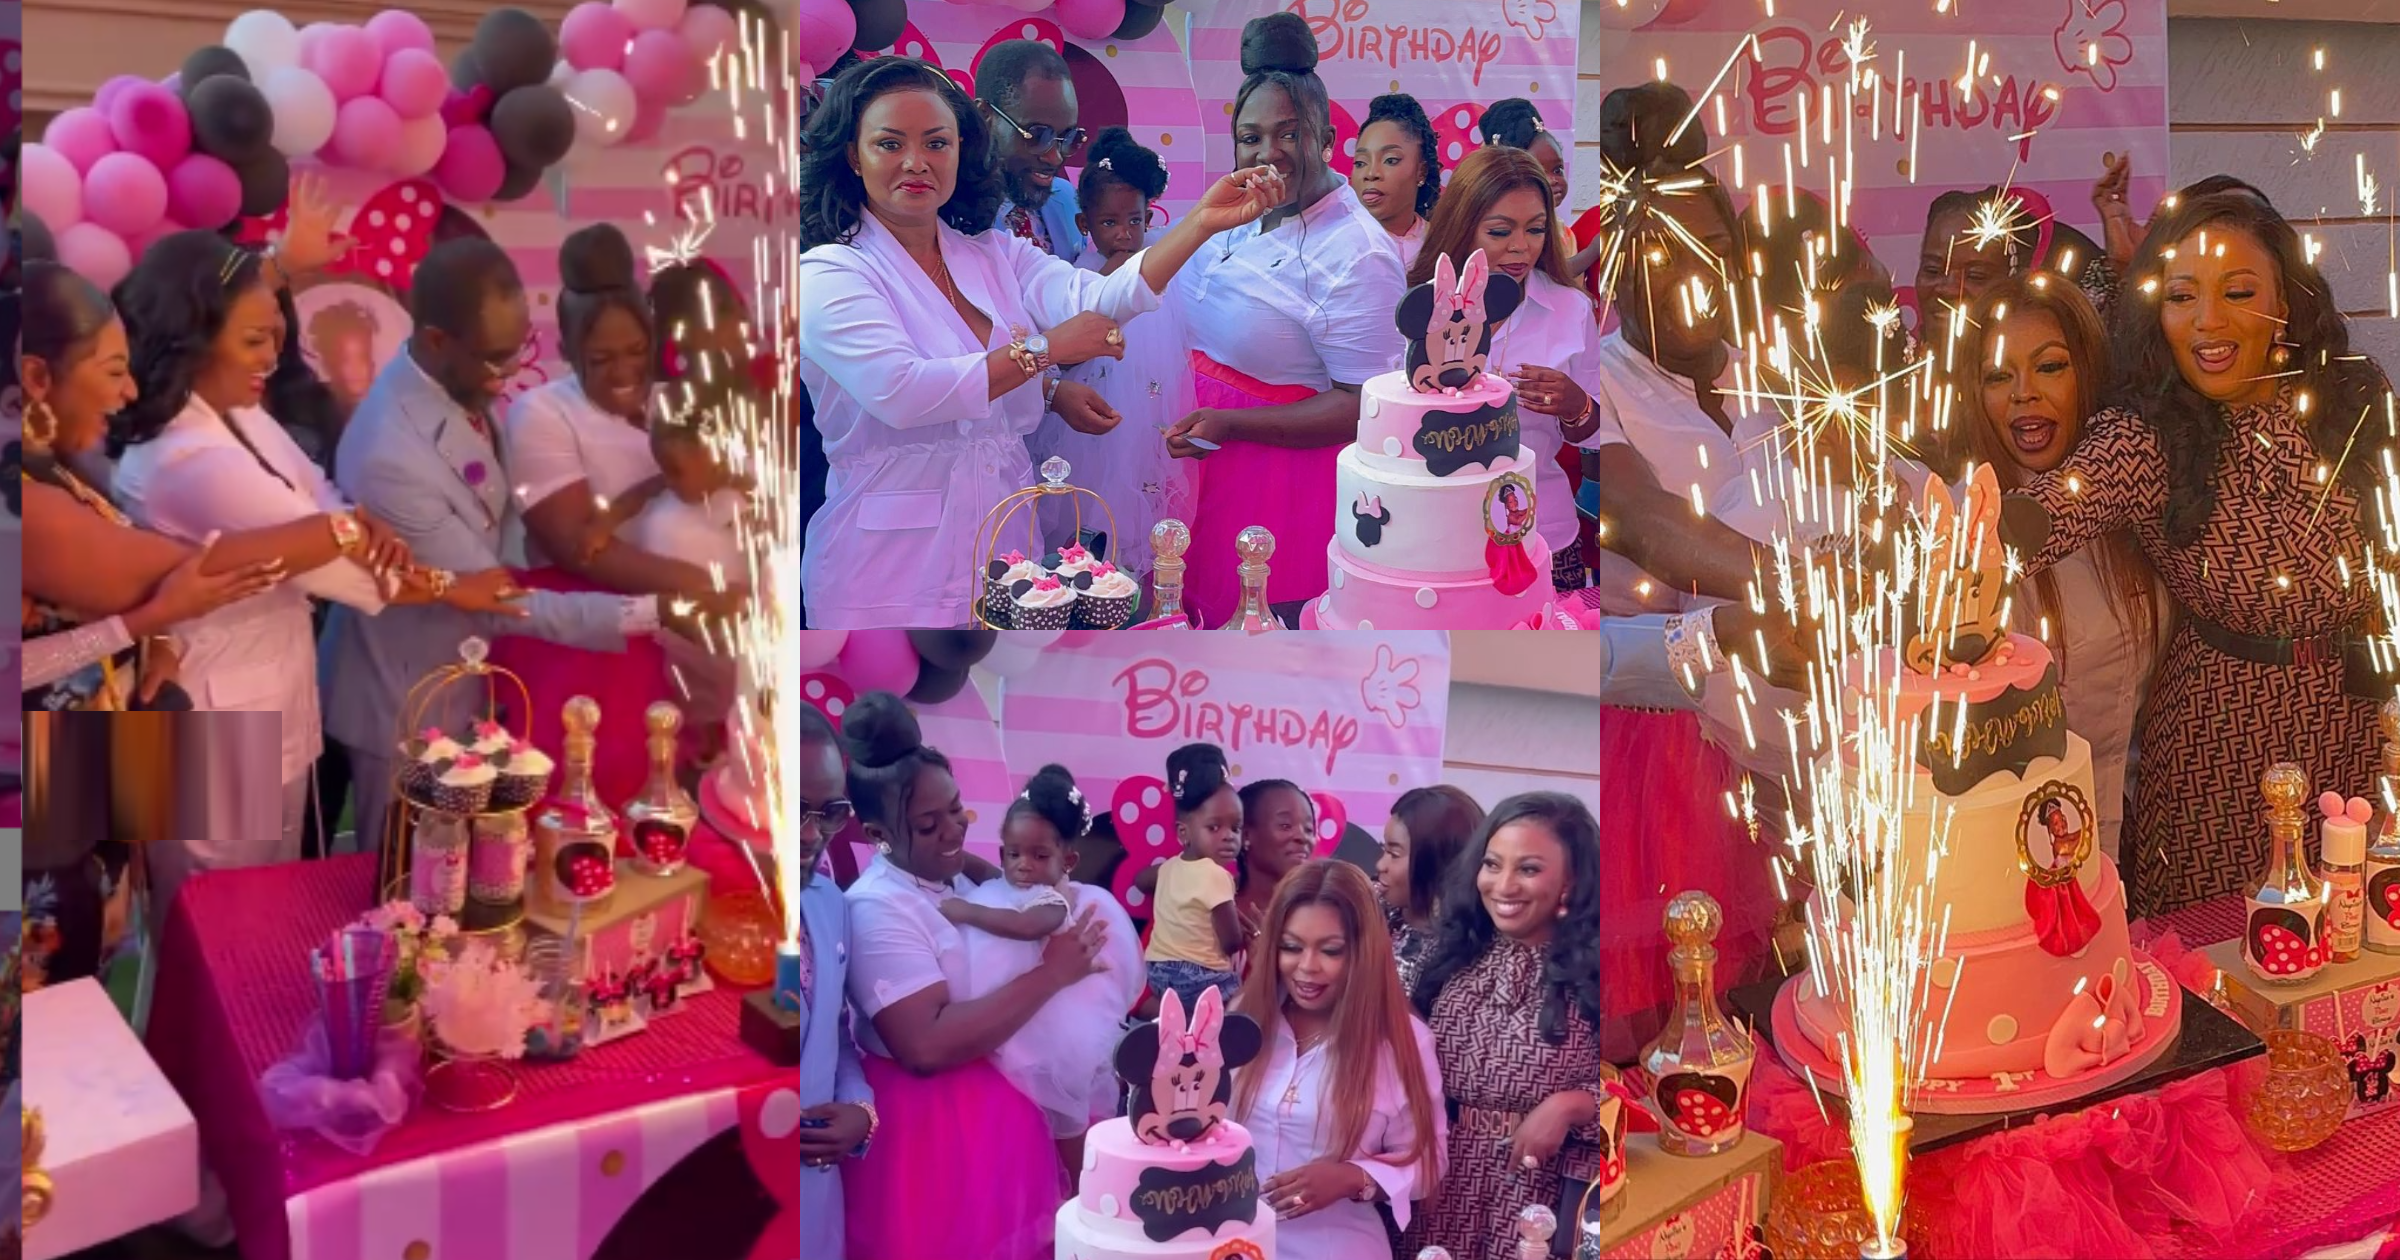 McBrown, Afia Schwar, and others joined Tracey Boakye's daughter, Nhyira, to cut cake at her 1st birthday party